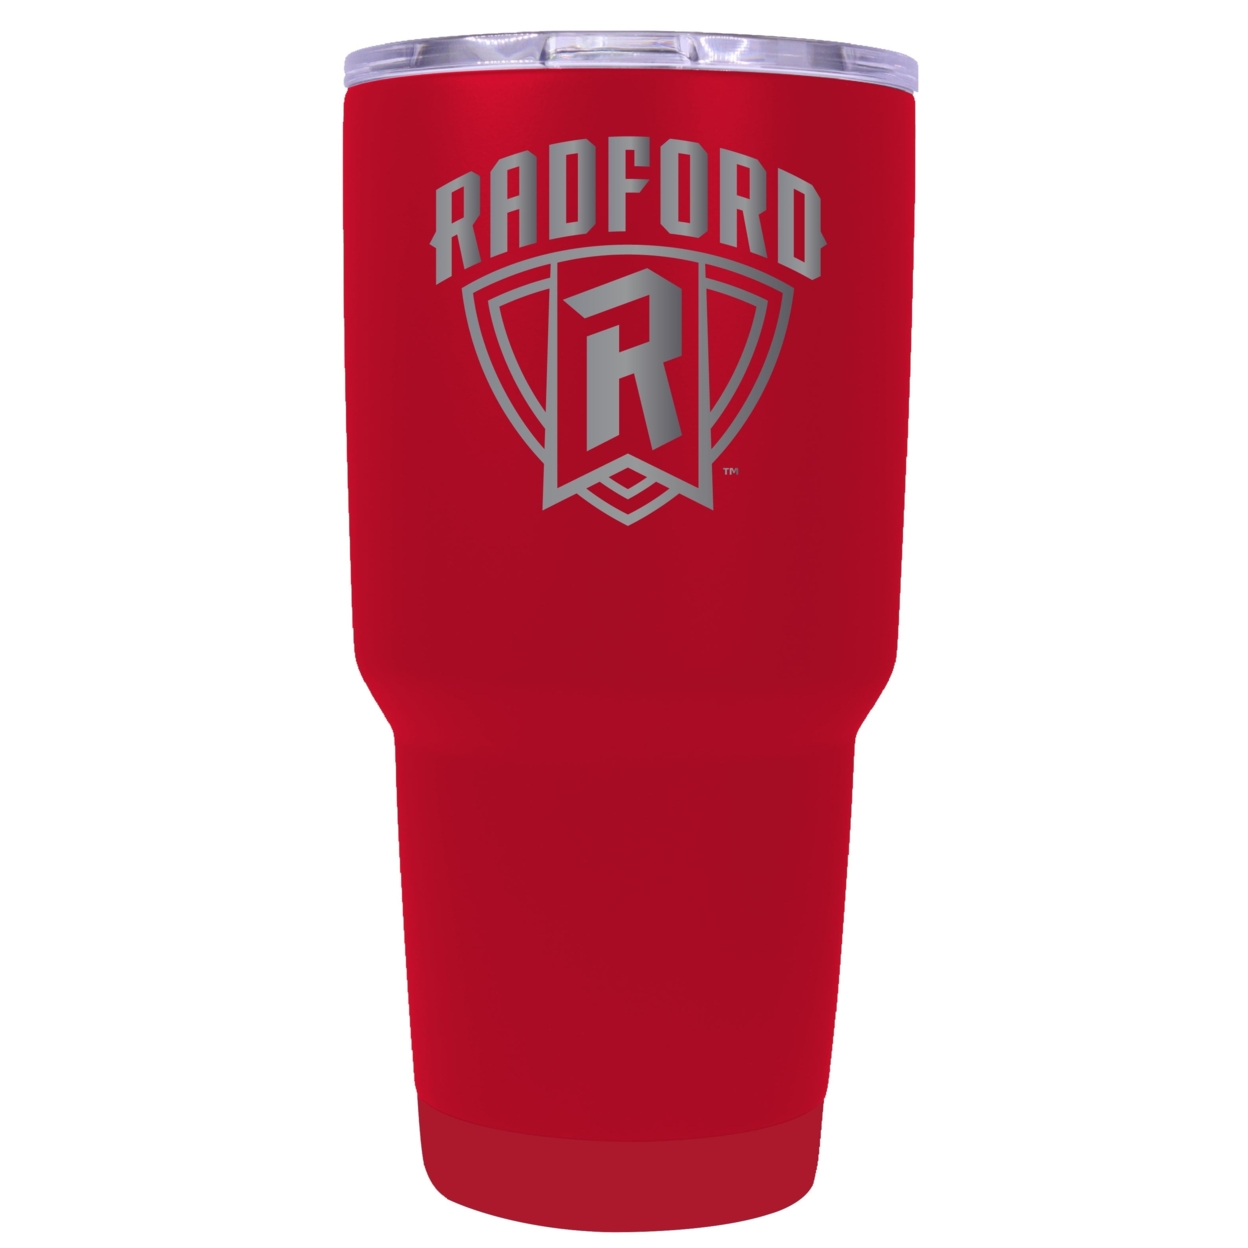 Radford University Highlanders 24 Oz Laser Engraved Stainless Steel Insulated Tumbler - Choose Your Color. - Red